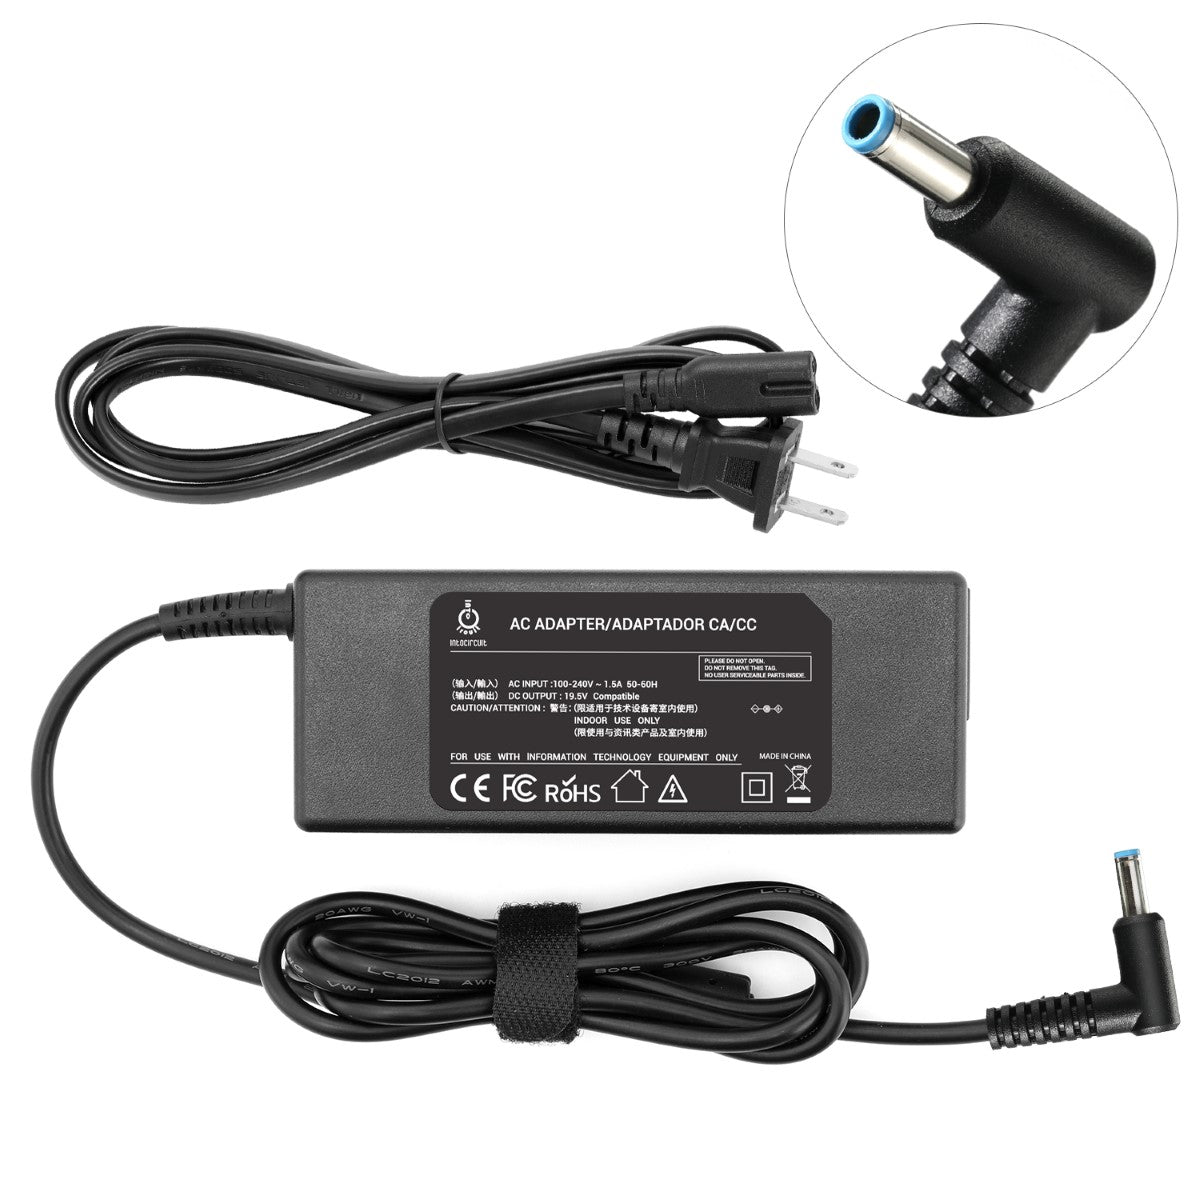 Charger for HP Spectre 13-4116dx x360 Laptop